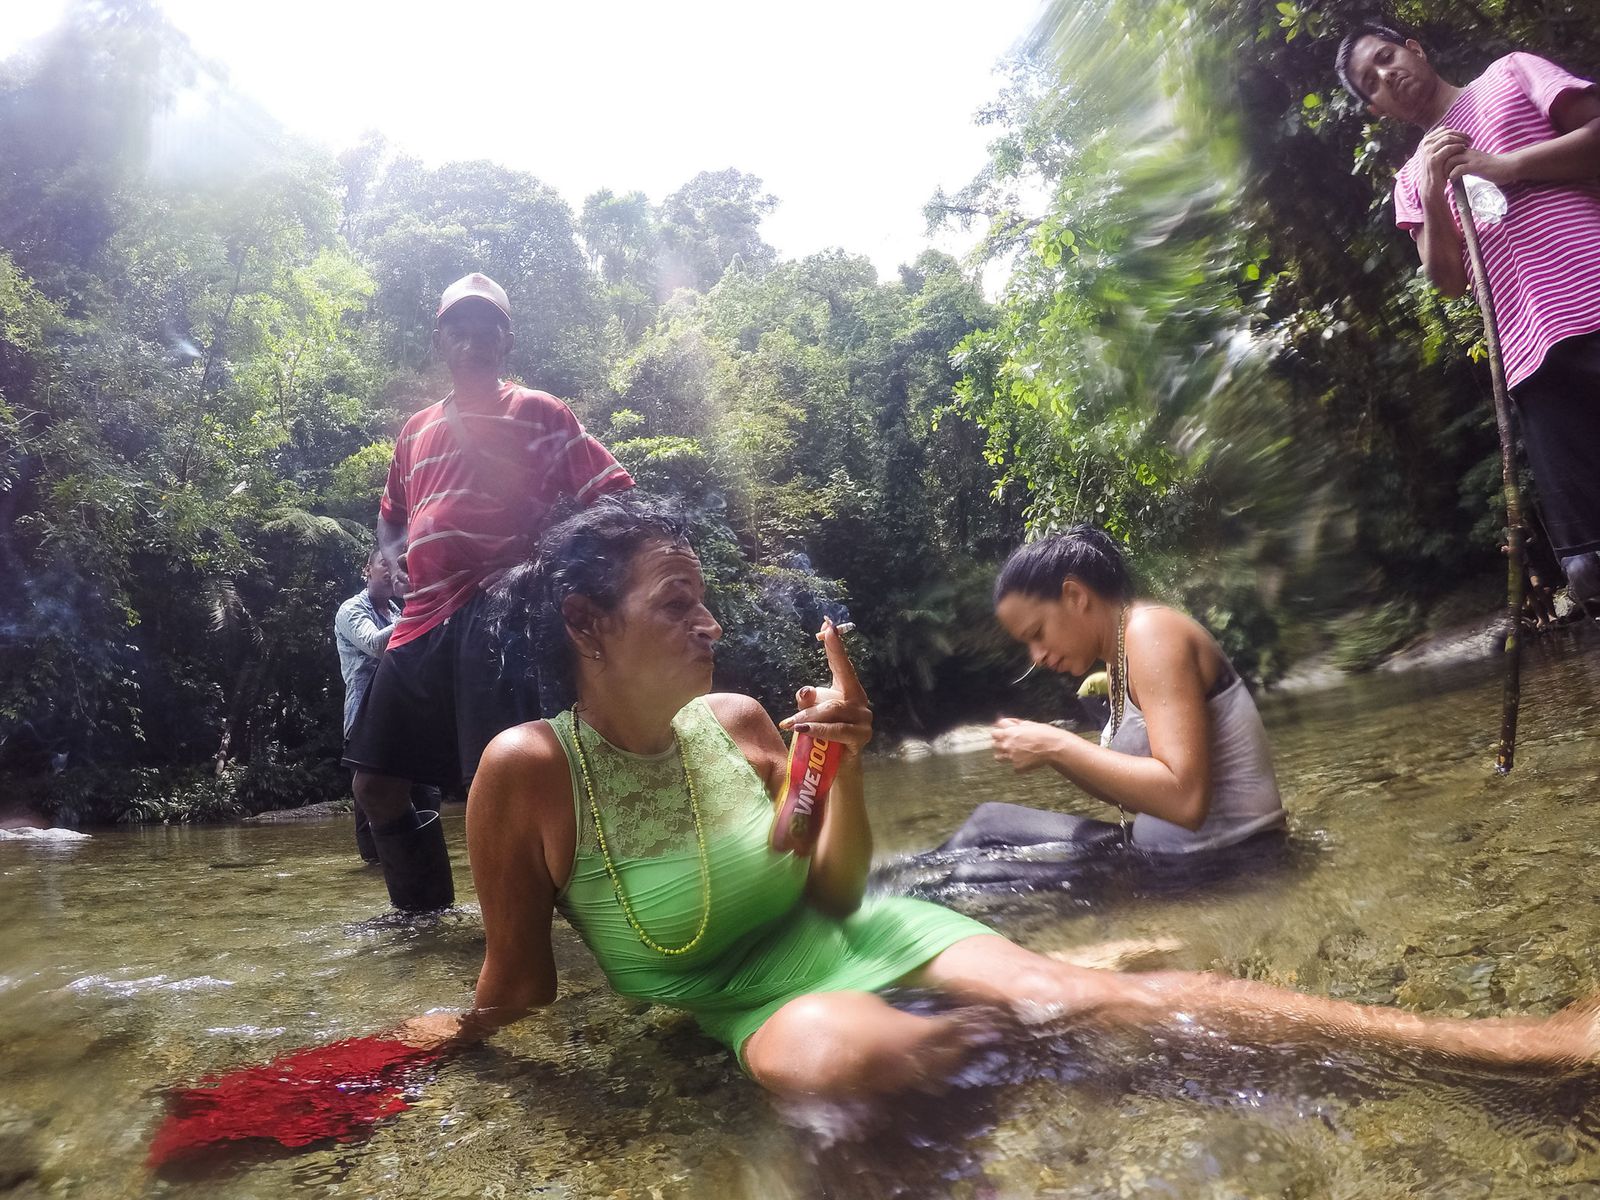 © Lisette Poole González - In the Darien Gap, the women stop after one of many river crossings.